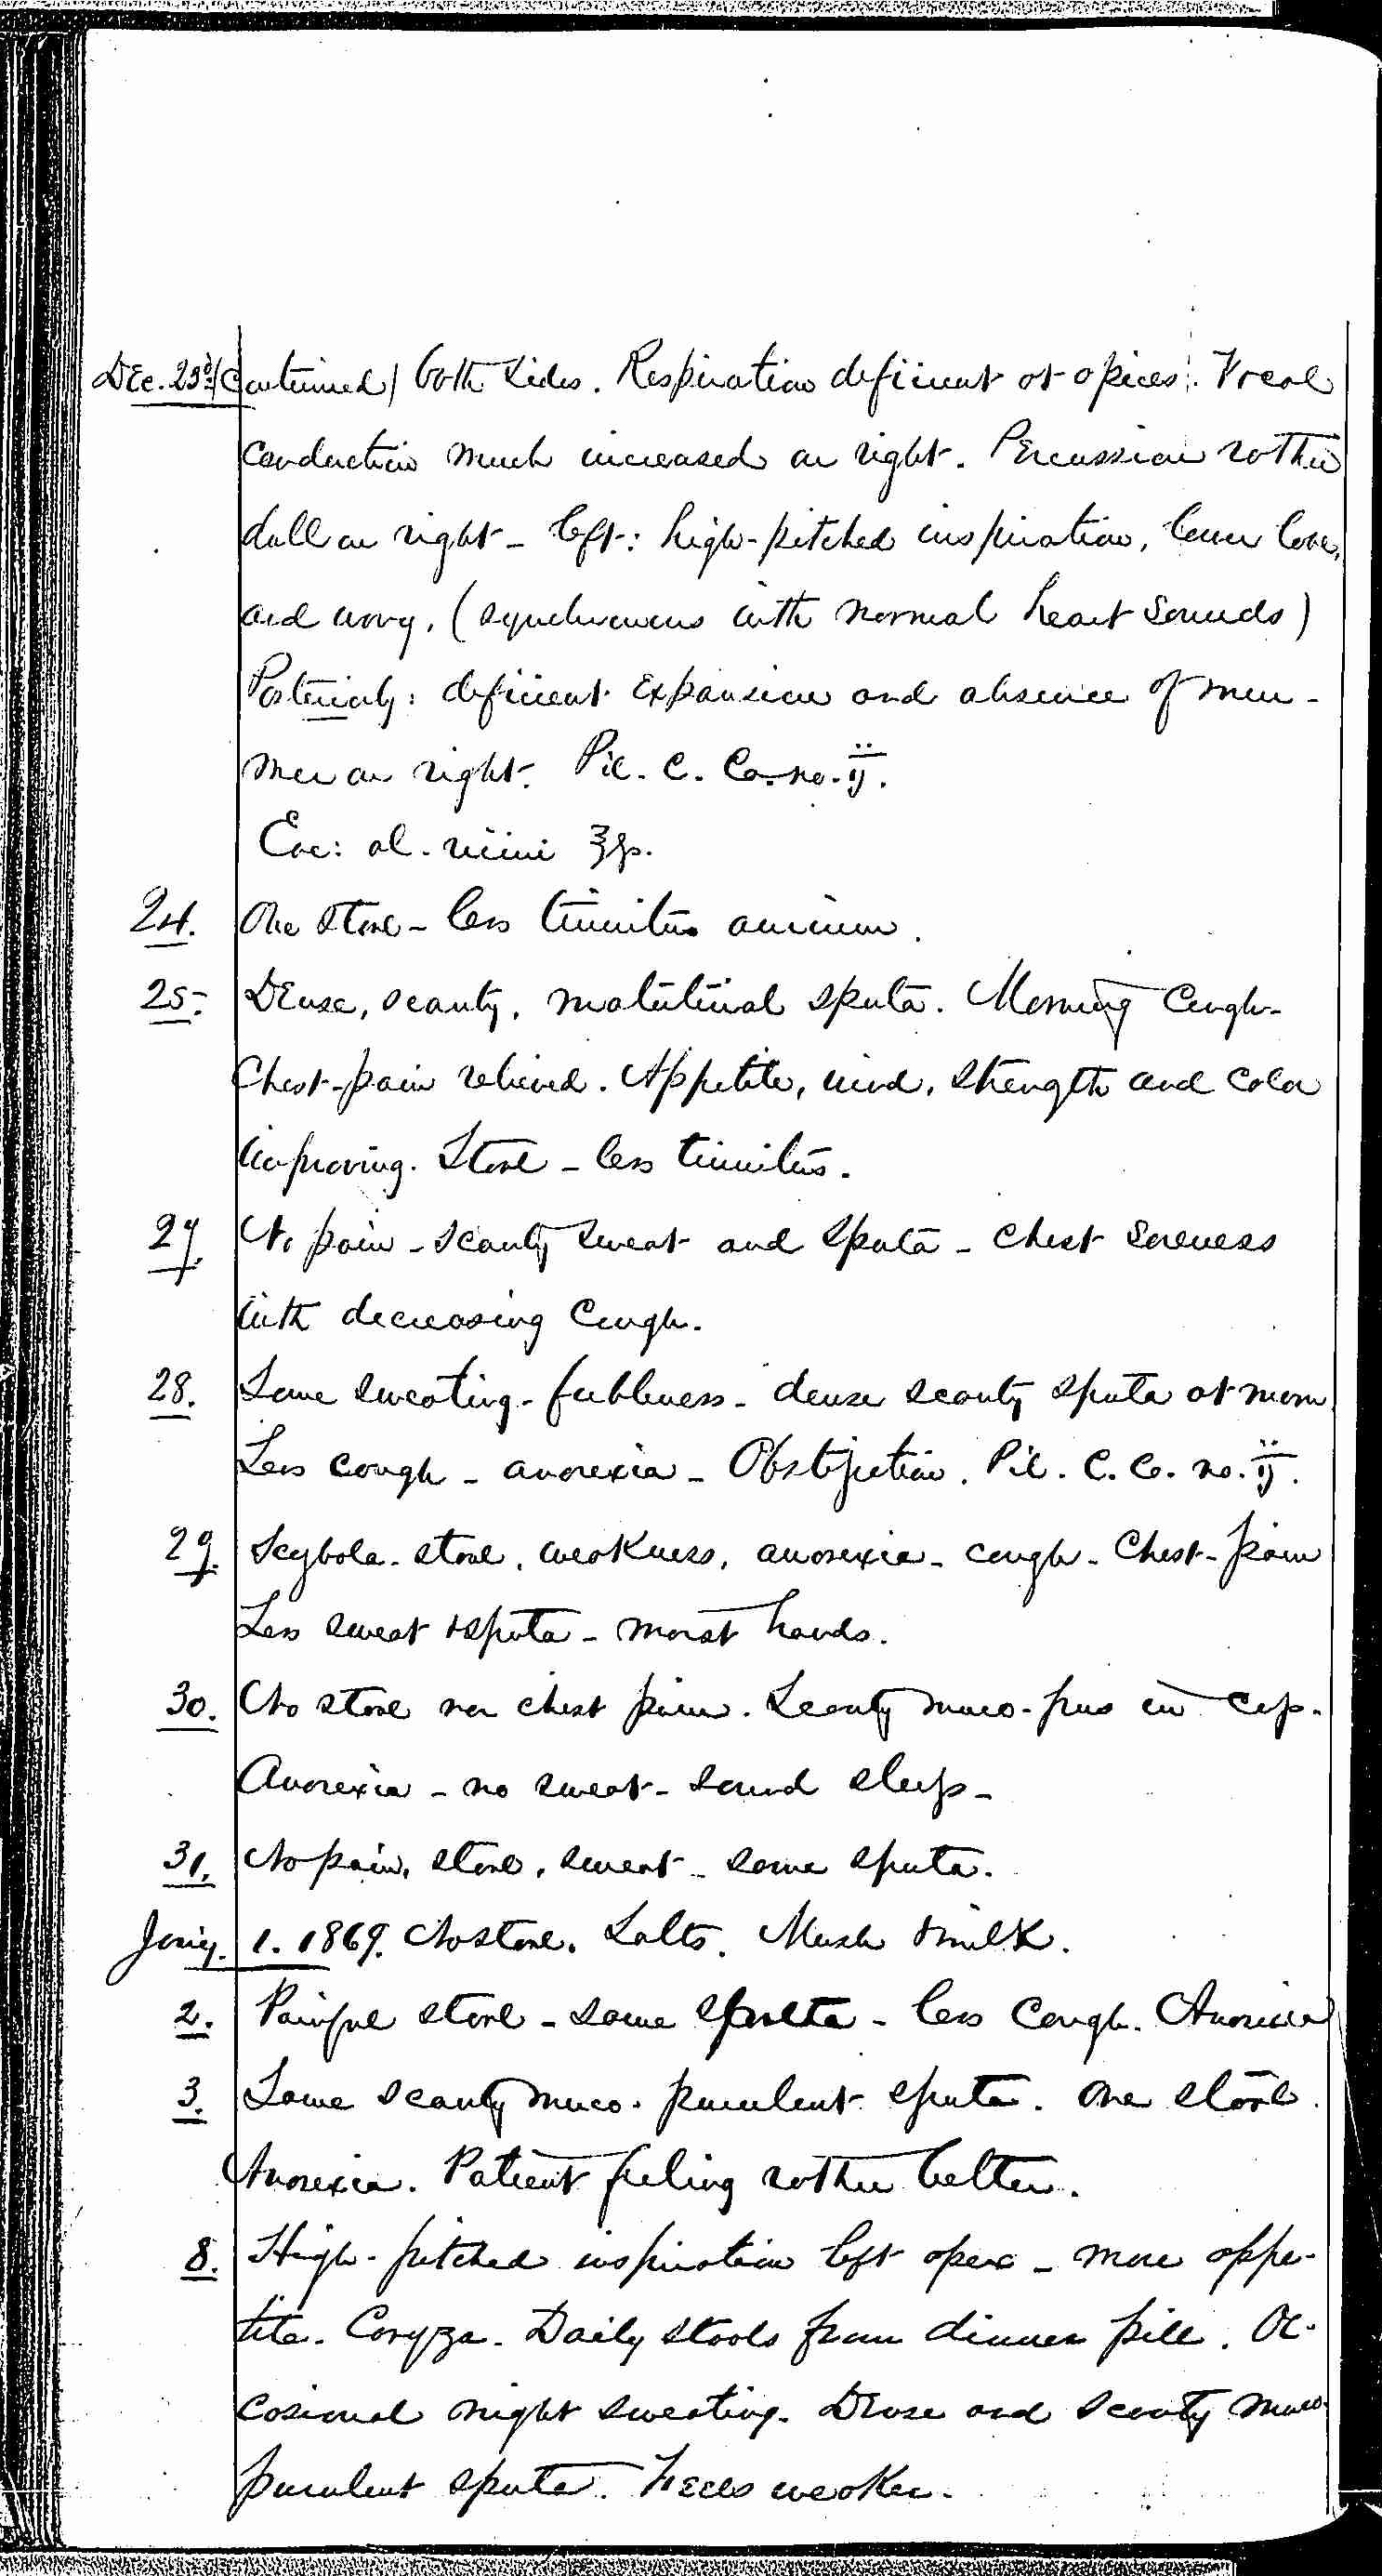 Entry for Peter C. Cheeks (page 4 of 16) in the log Hospital Tickets and Case Papers - Naval Hospital - Washington, D.C. - 1868-69